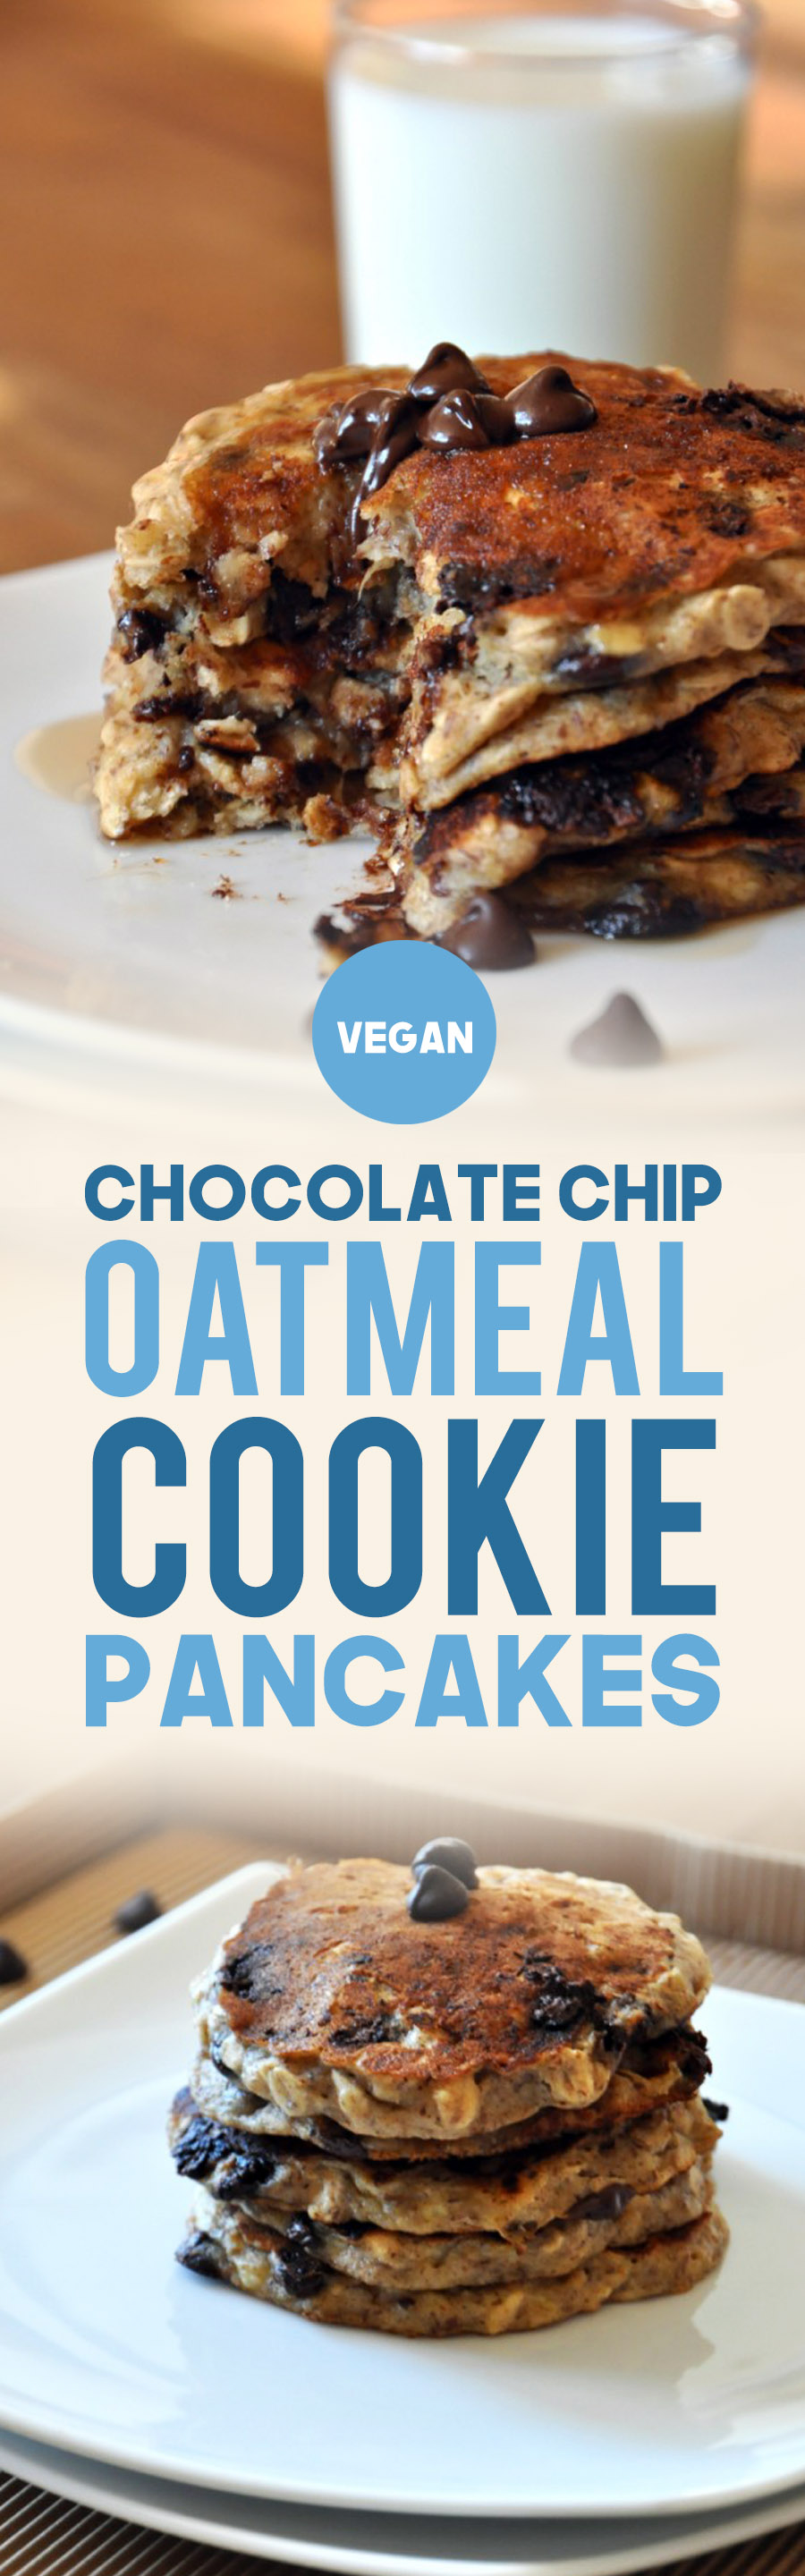 Plate piled high with Vegan Chocolate Chip Oatmeal Cookie Pancakes